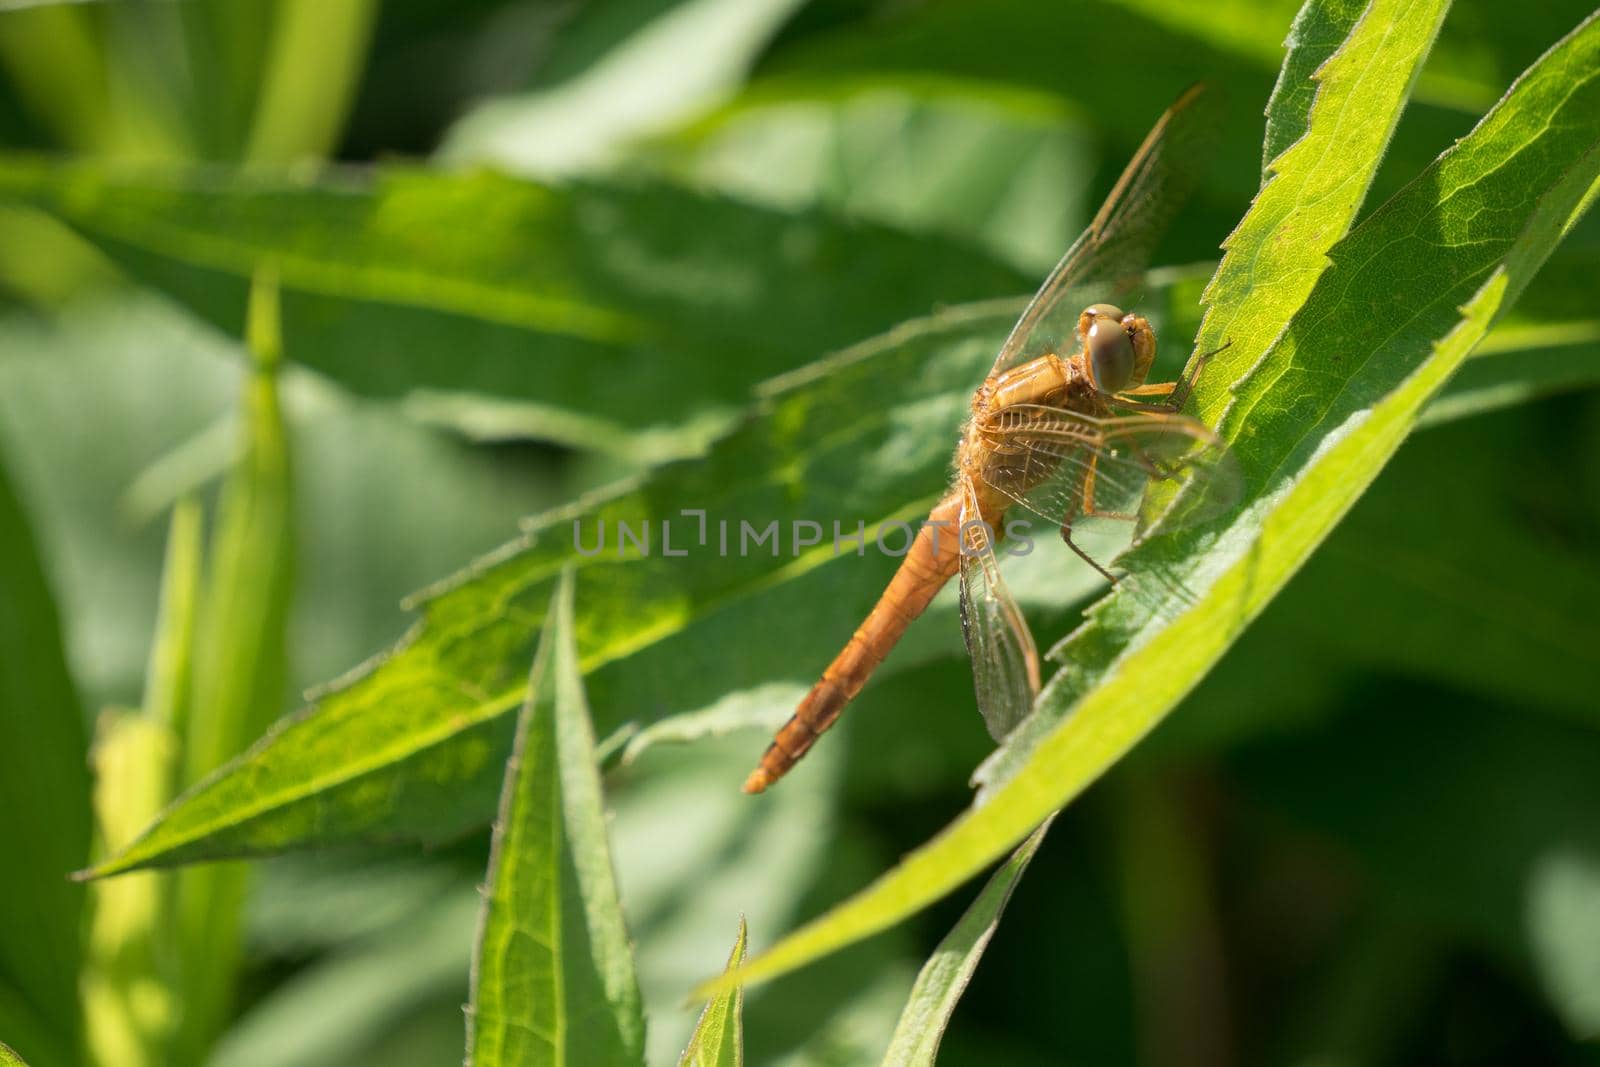 Portrait of a dragonfly on a green plant background, wildlife